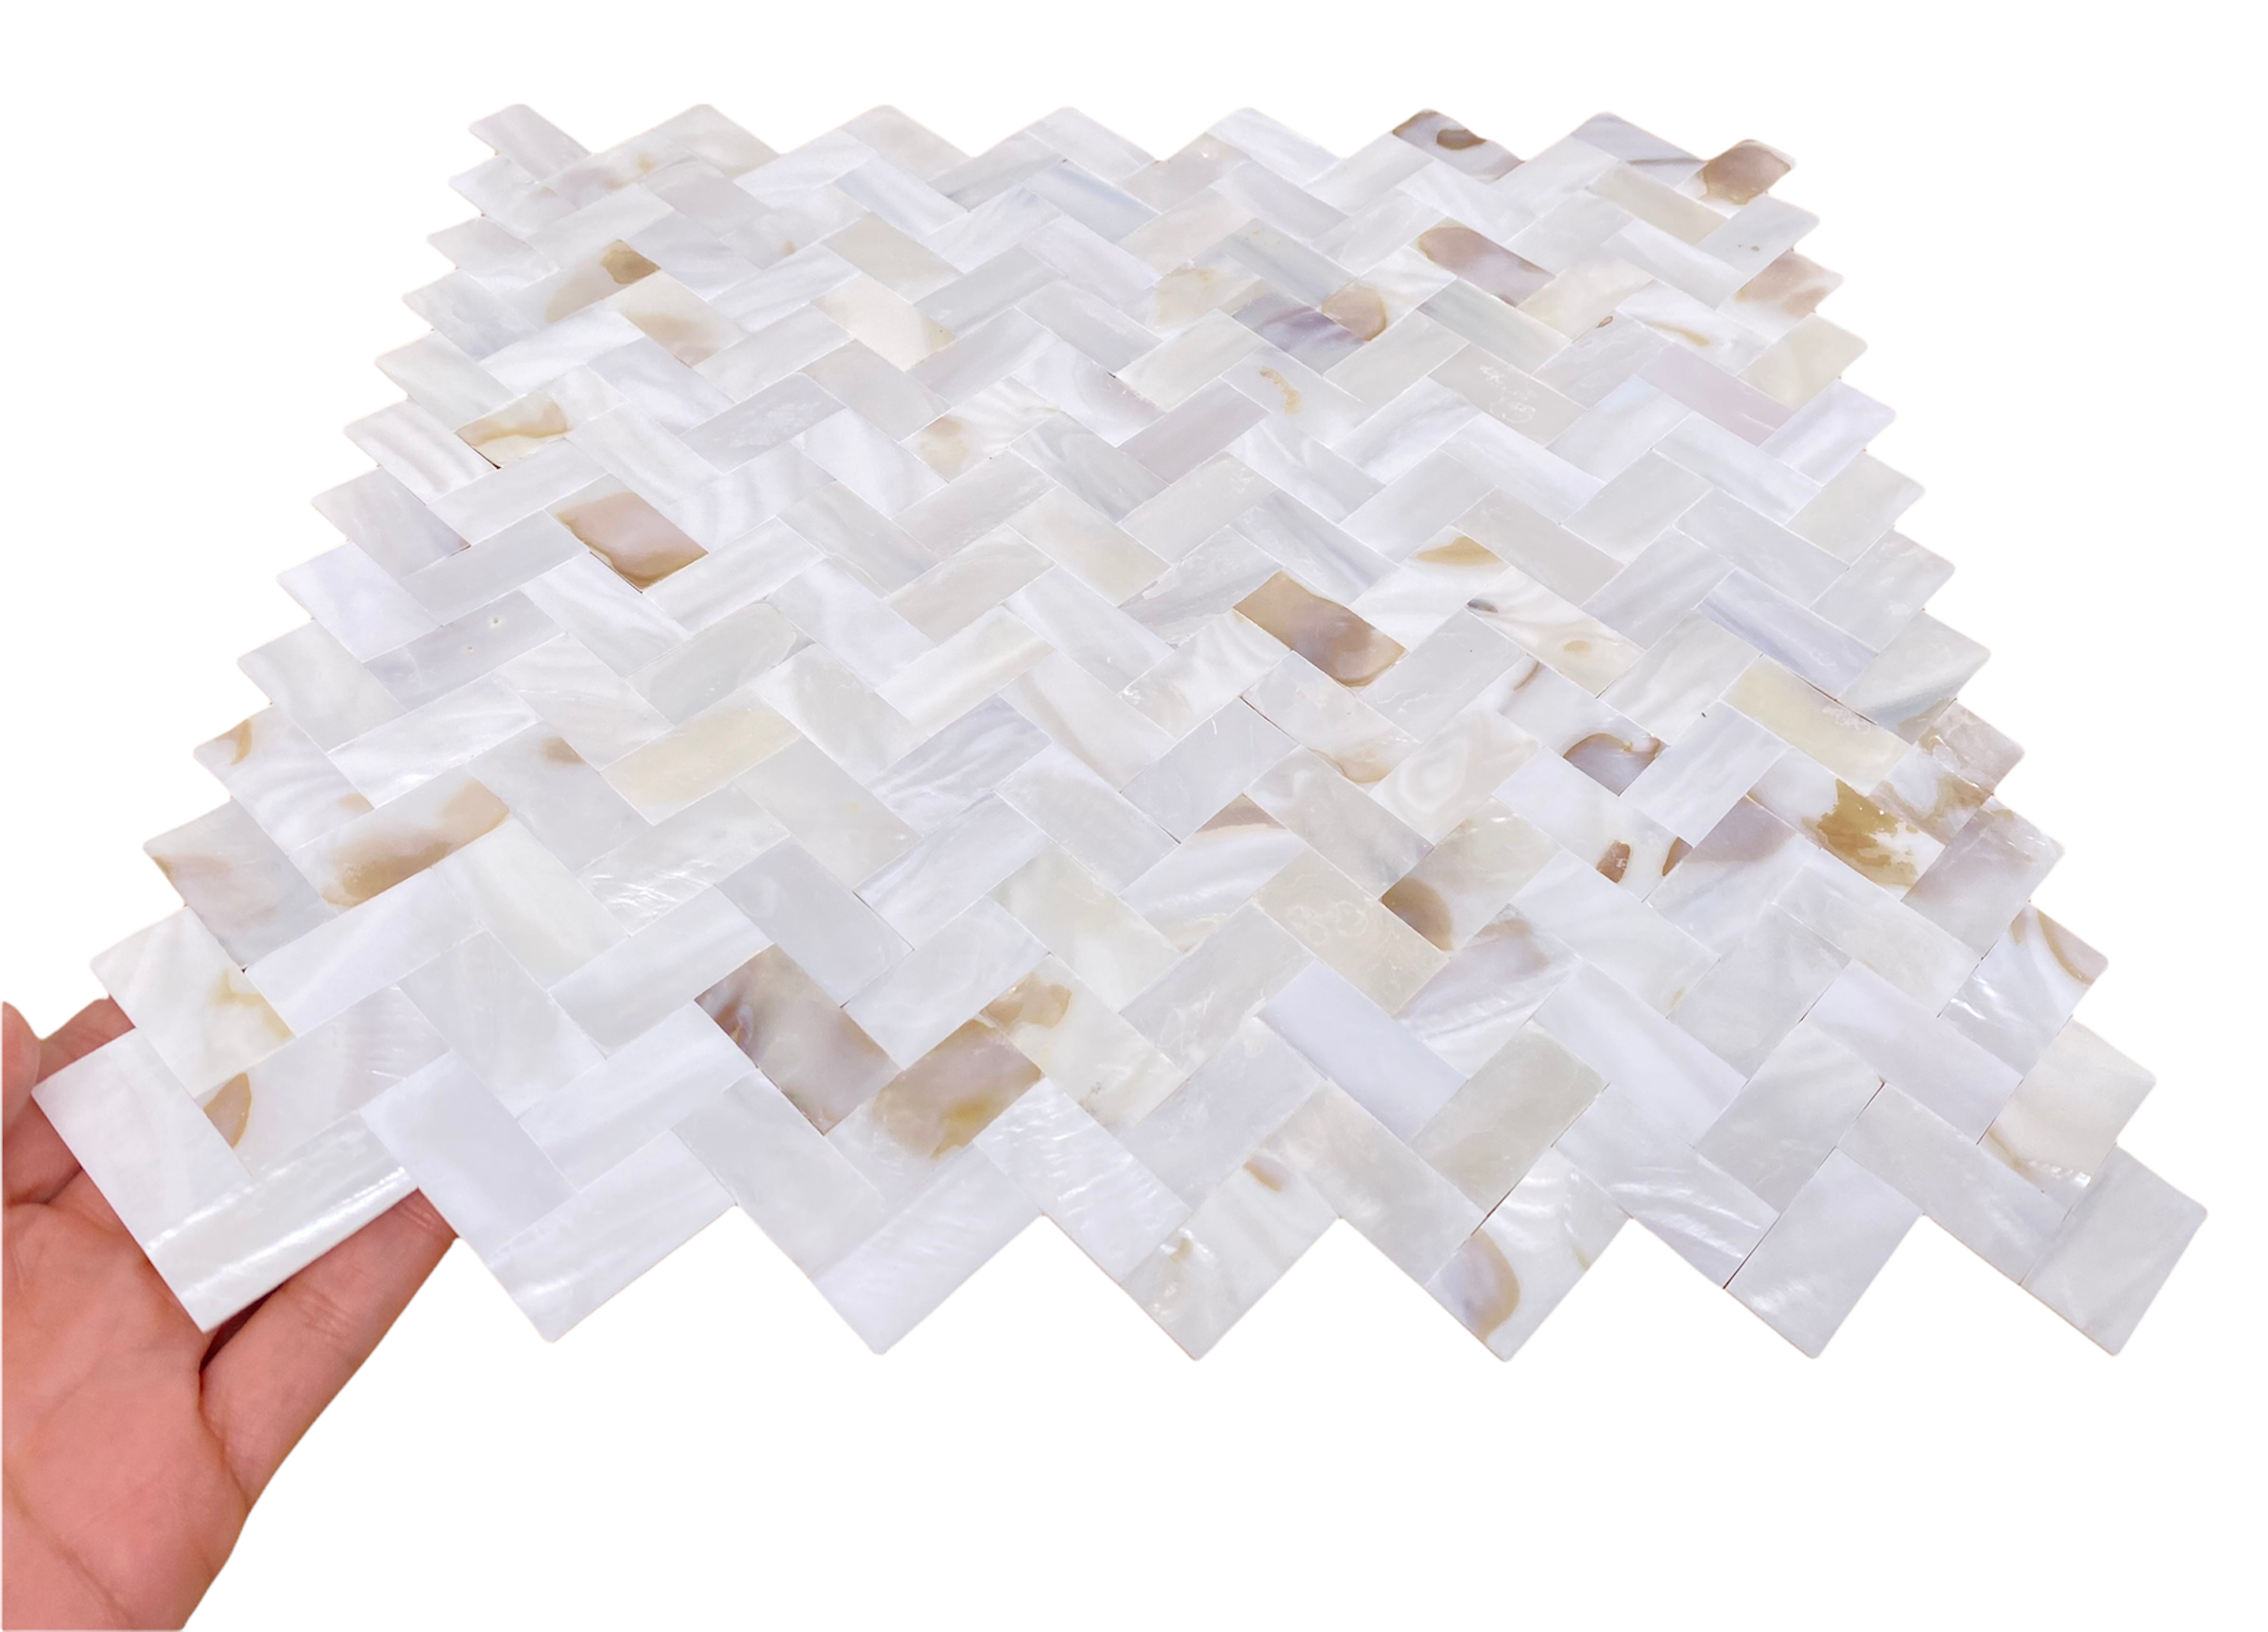 Mother of Pearl Oyster White Natural Sea Shell Seamless Herringbone Tile for Kitchen Backsplashes By Tenedos